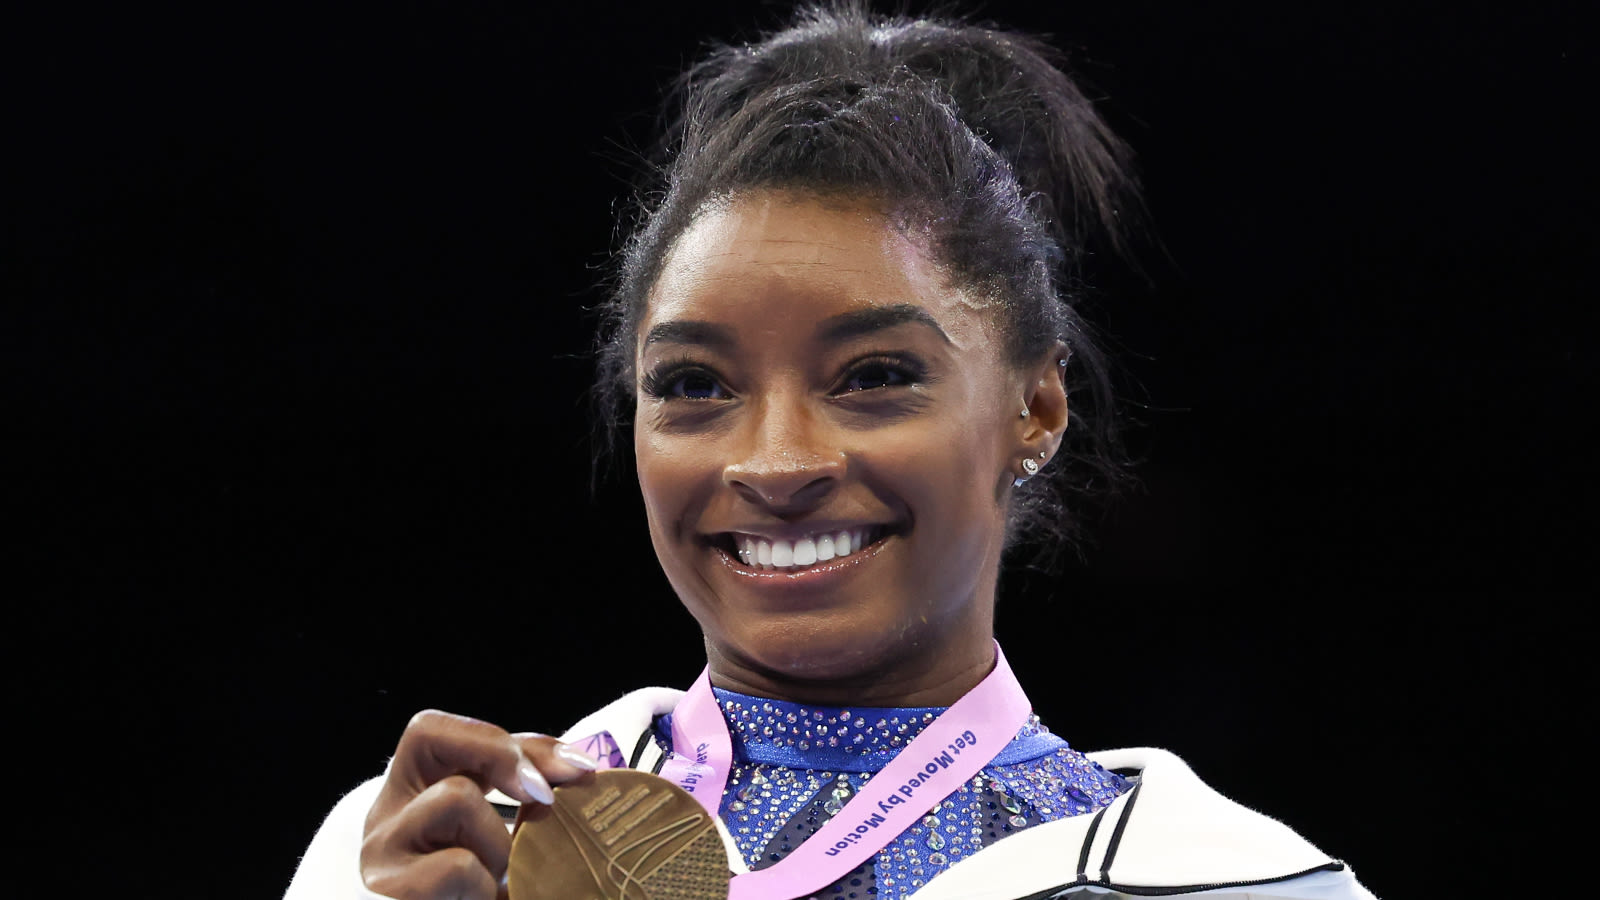 Simone Biles' Olympics timeline: Medals, records and more to know about  U.S. star gymnast